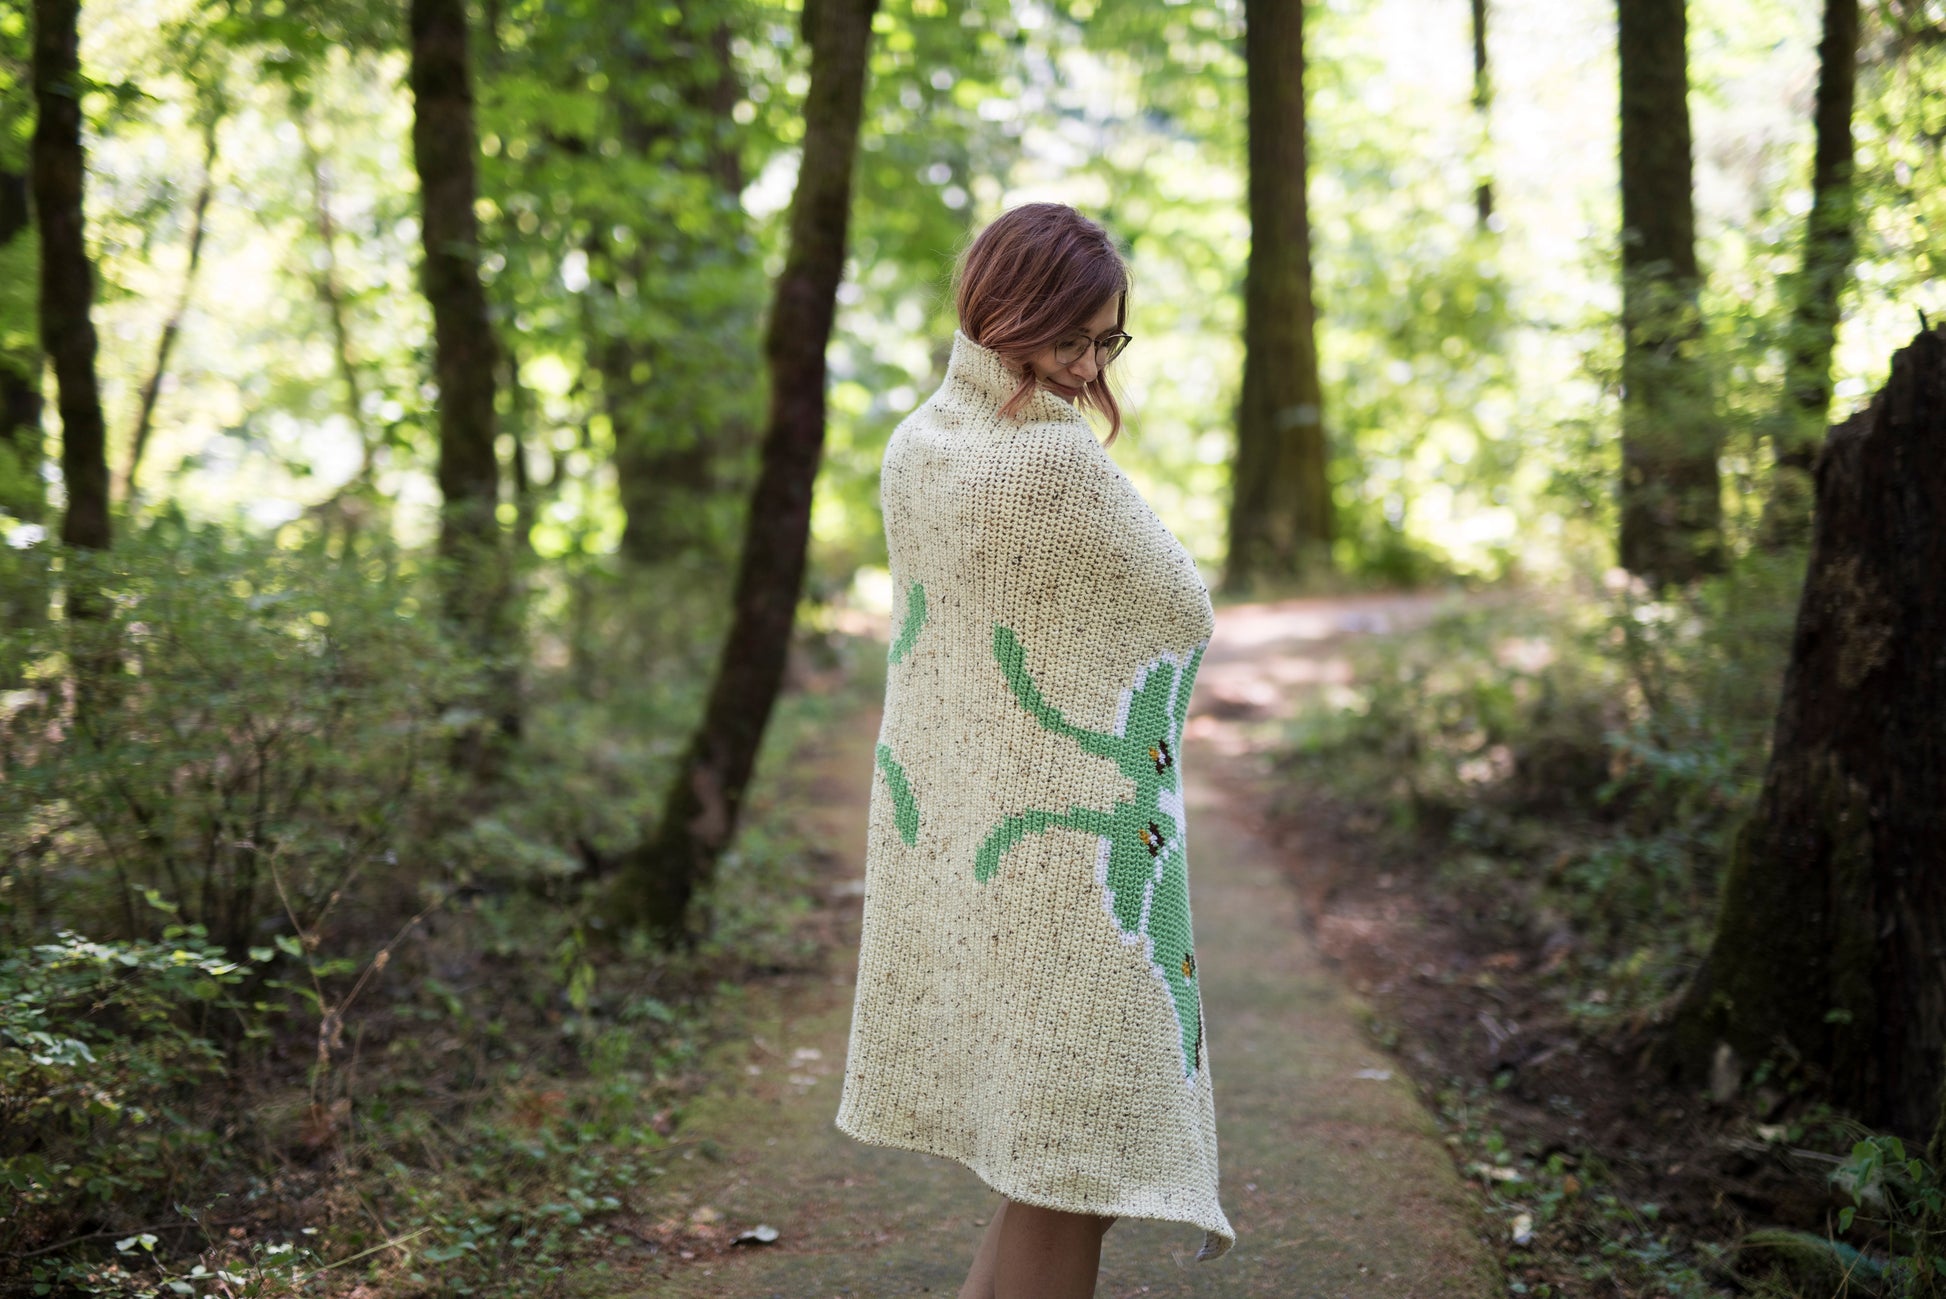 Crochet Pattern: The Luna Blanket – Made by Hailey Bailey